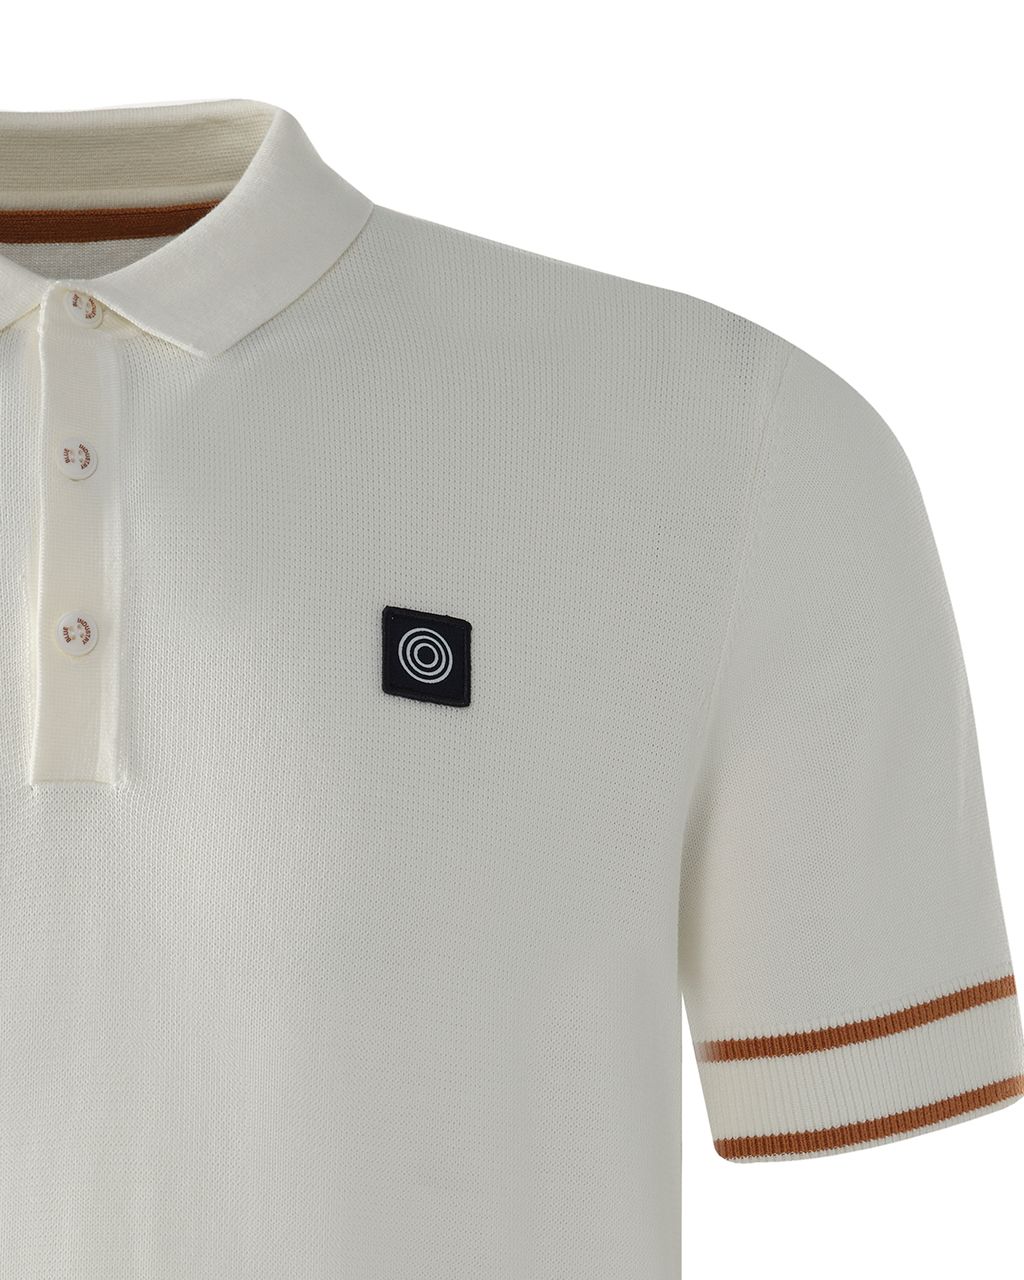 Blue Industry Polo KM Off white 078364-001-L